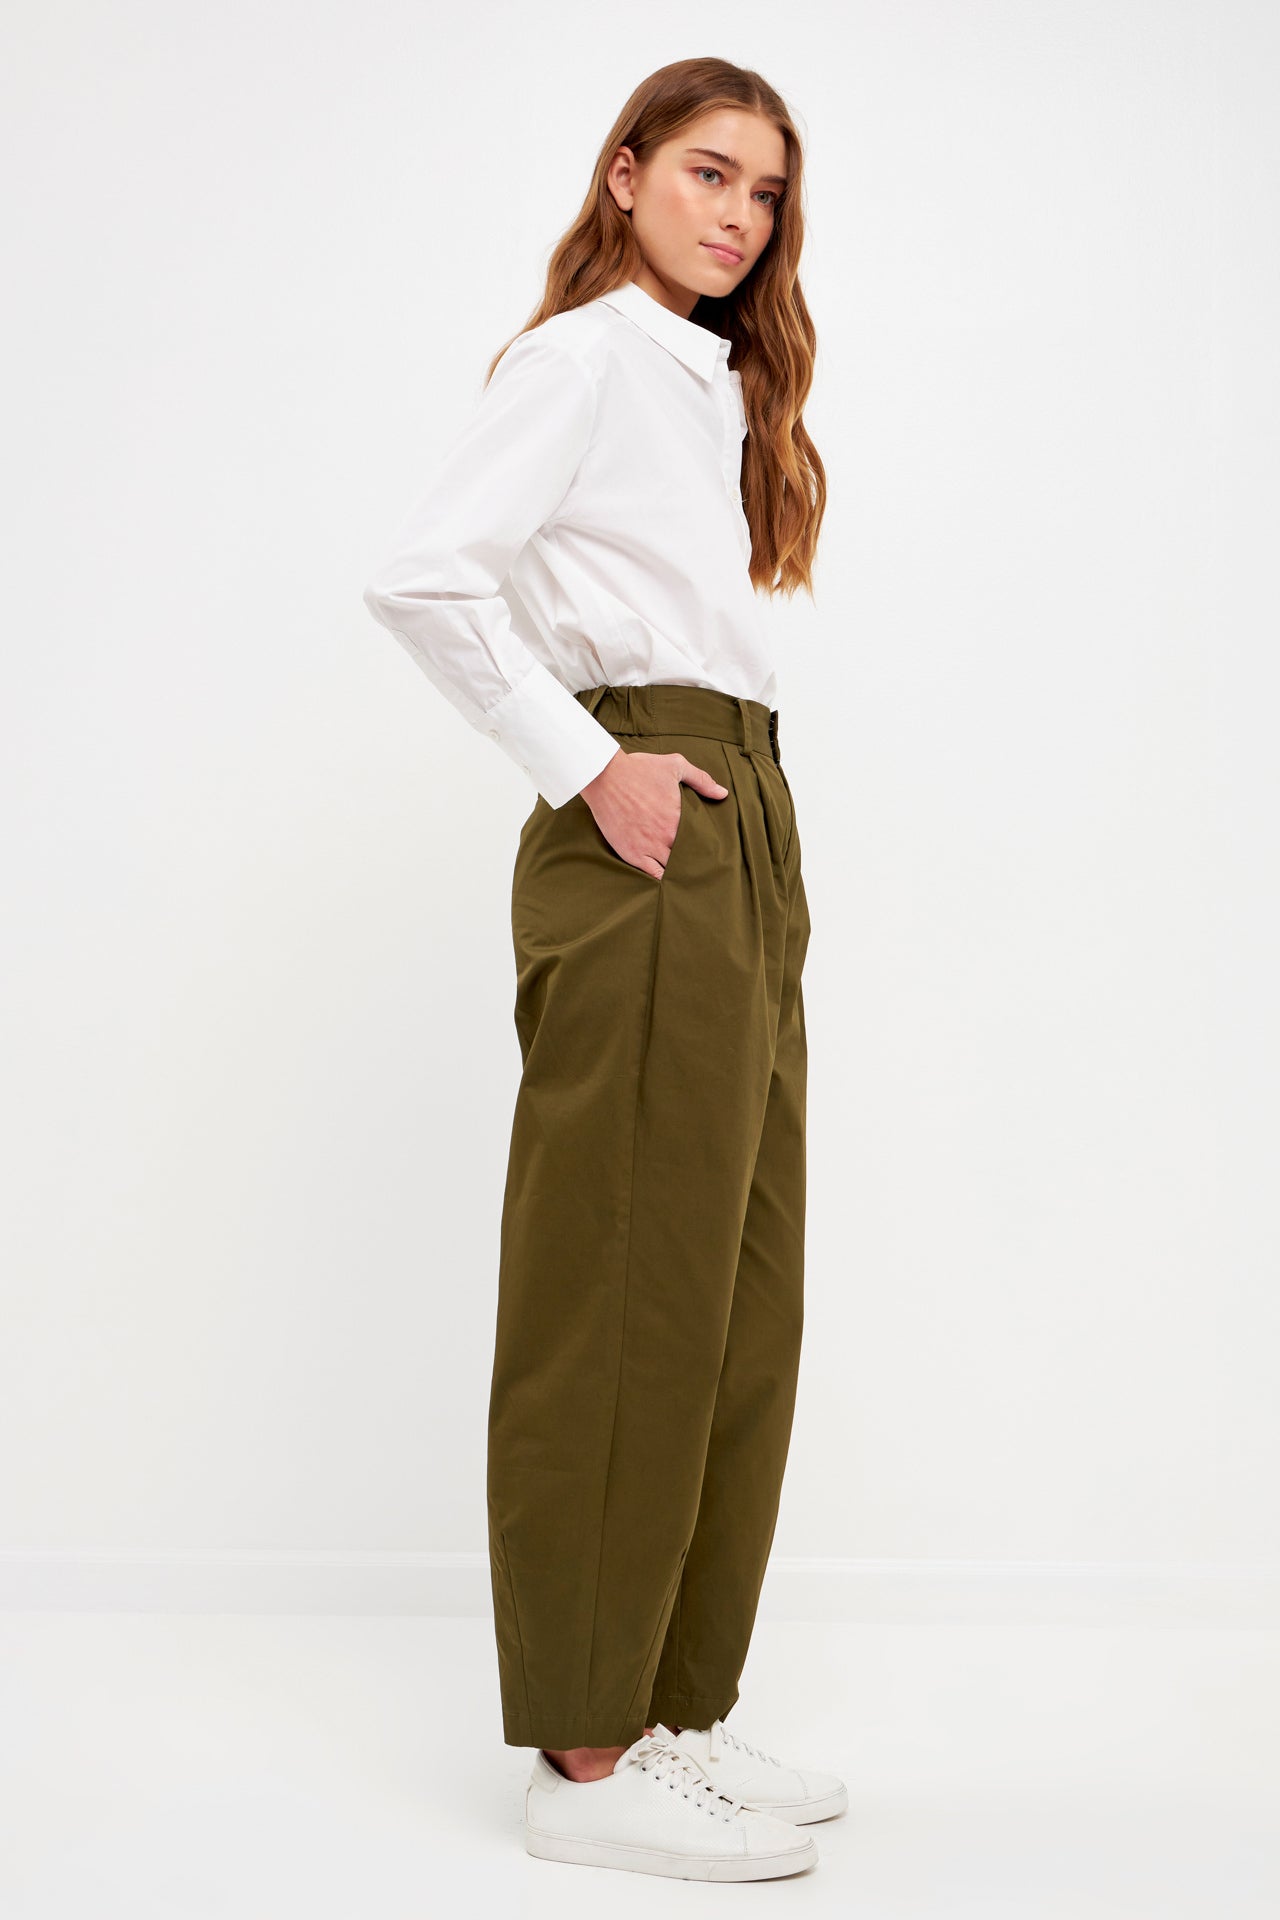 ENGLISH FACTORY - High Waist Pleated Trouser - PANTS available at Objectrare